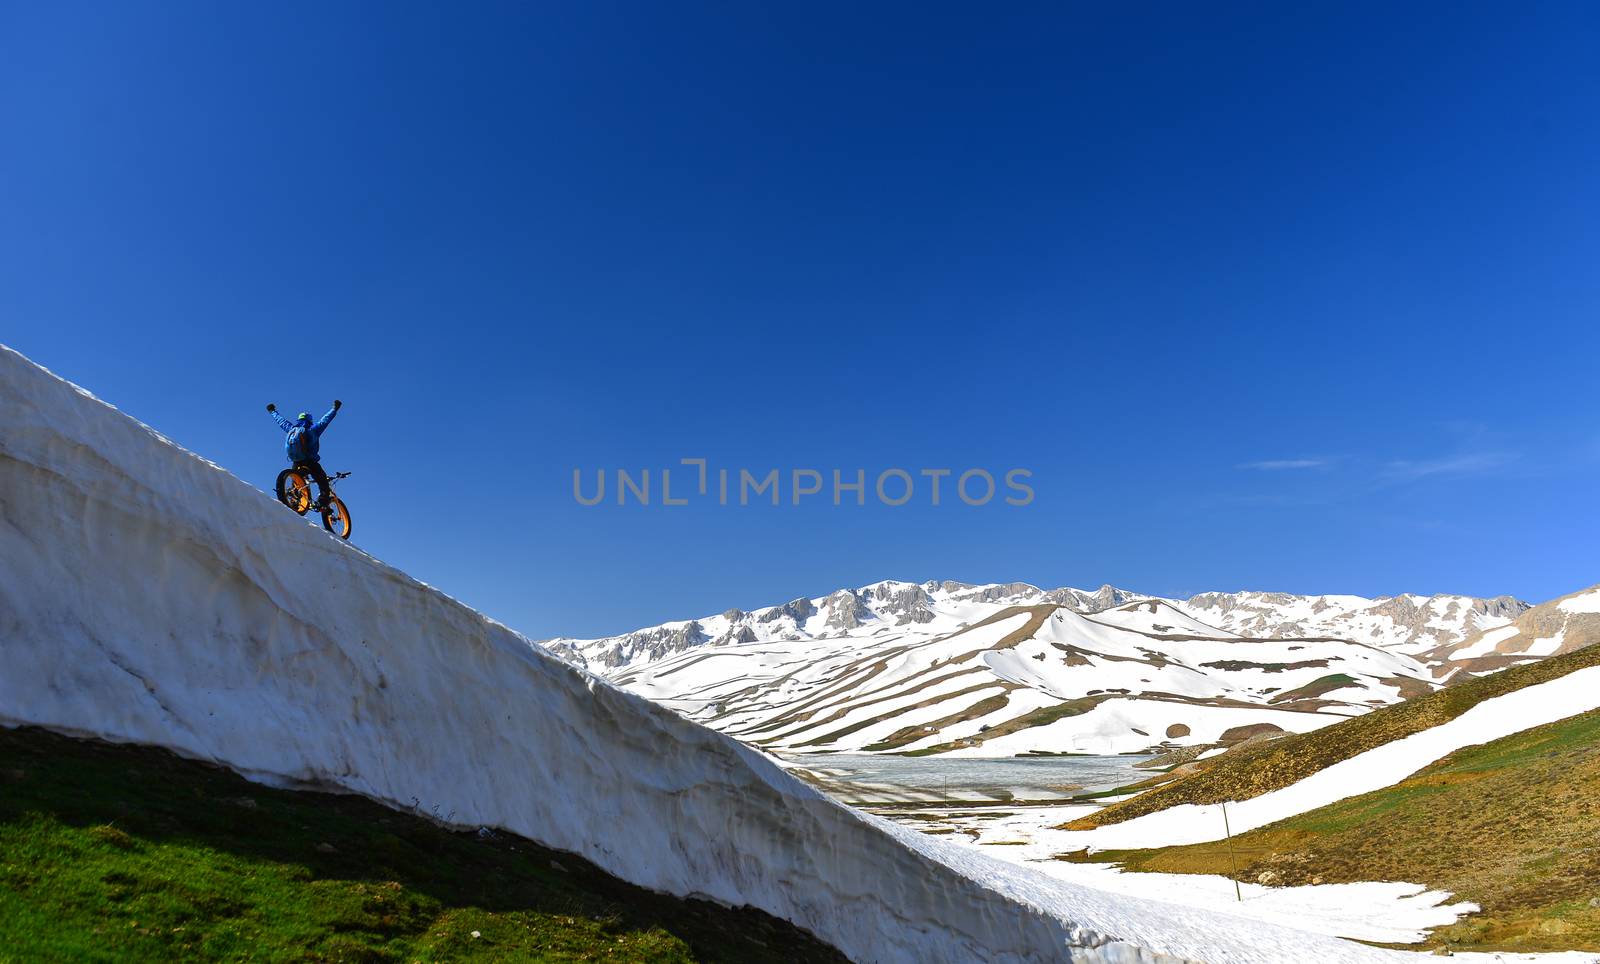 Adventure in high and snowy mountains with bike by crazymedia007